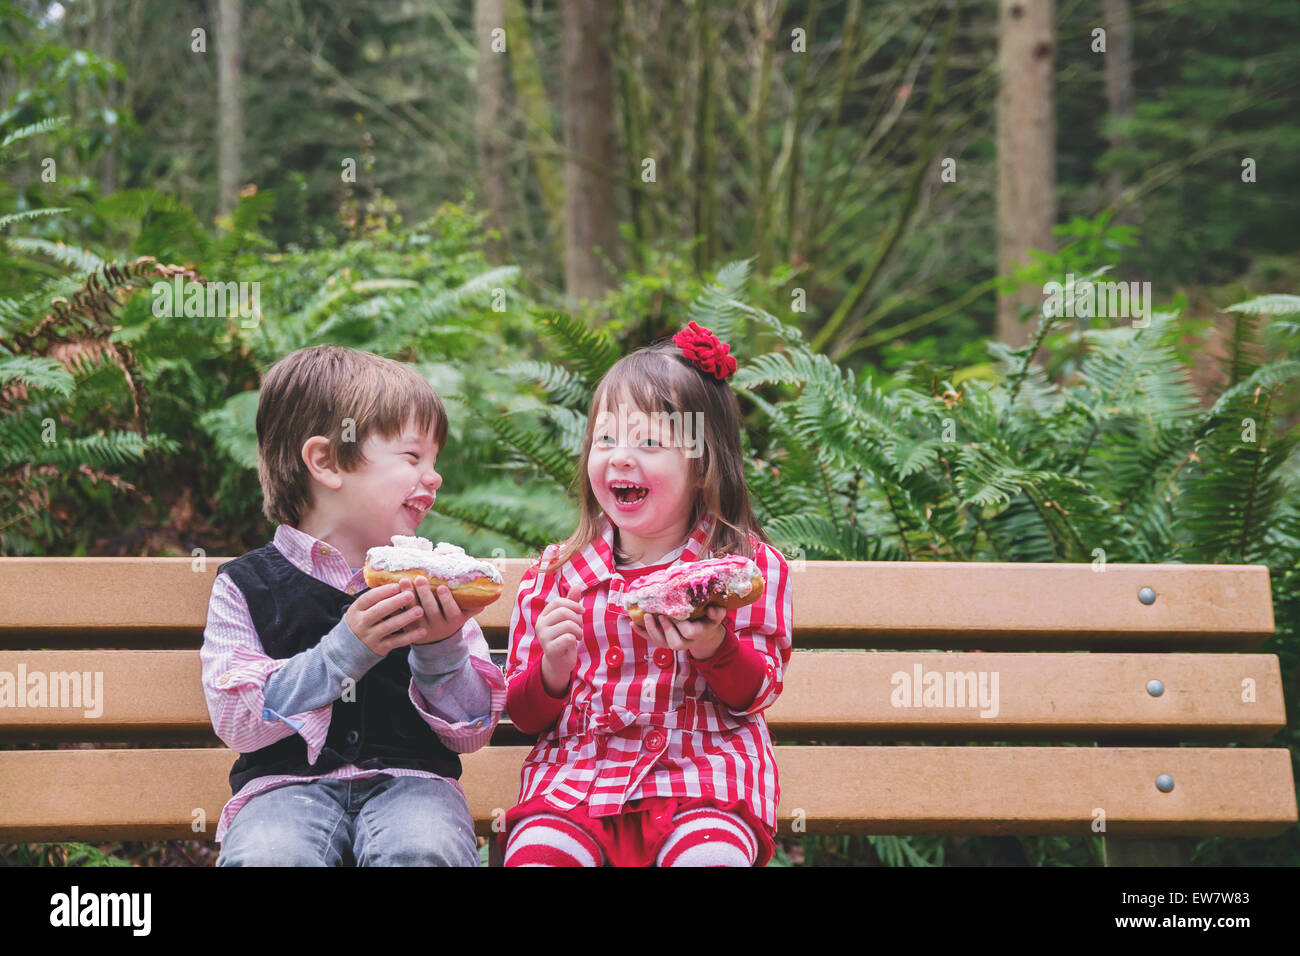 Two children sitting on a bench laughing and eating donuts Stock Photo